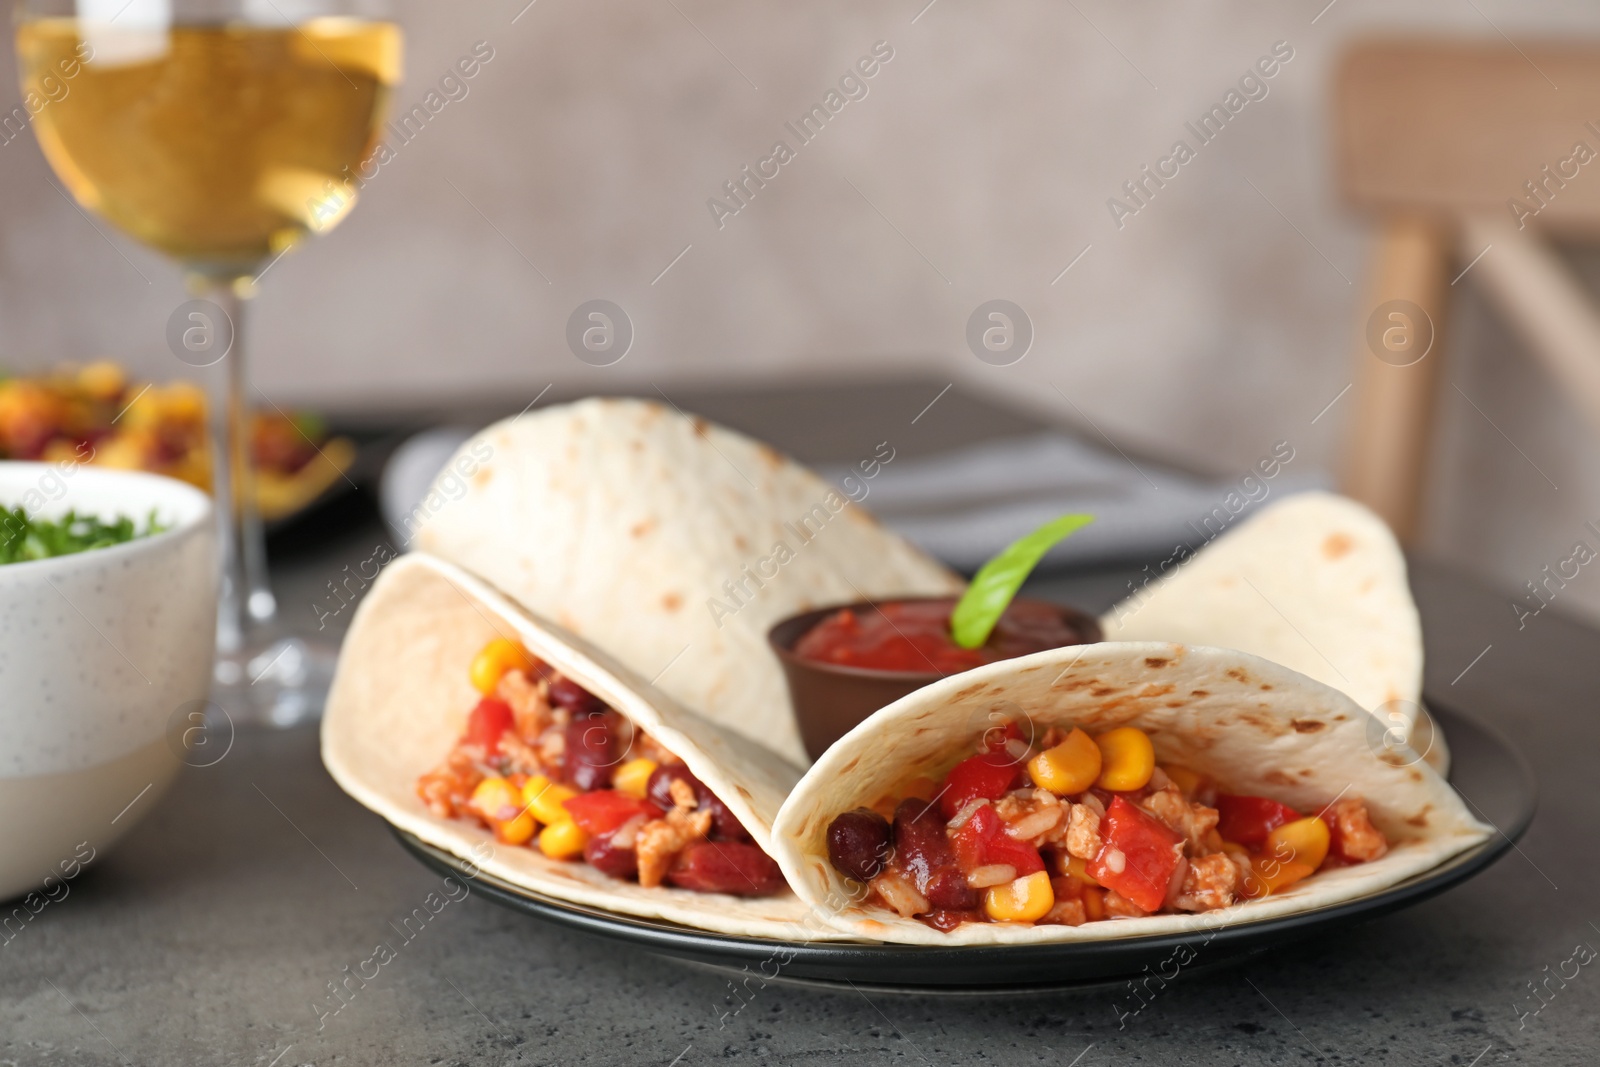 Photo of Plate with tasty chili con carne served in tortillas on gray table